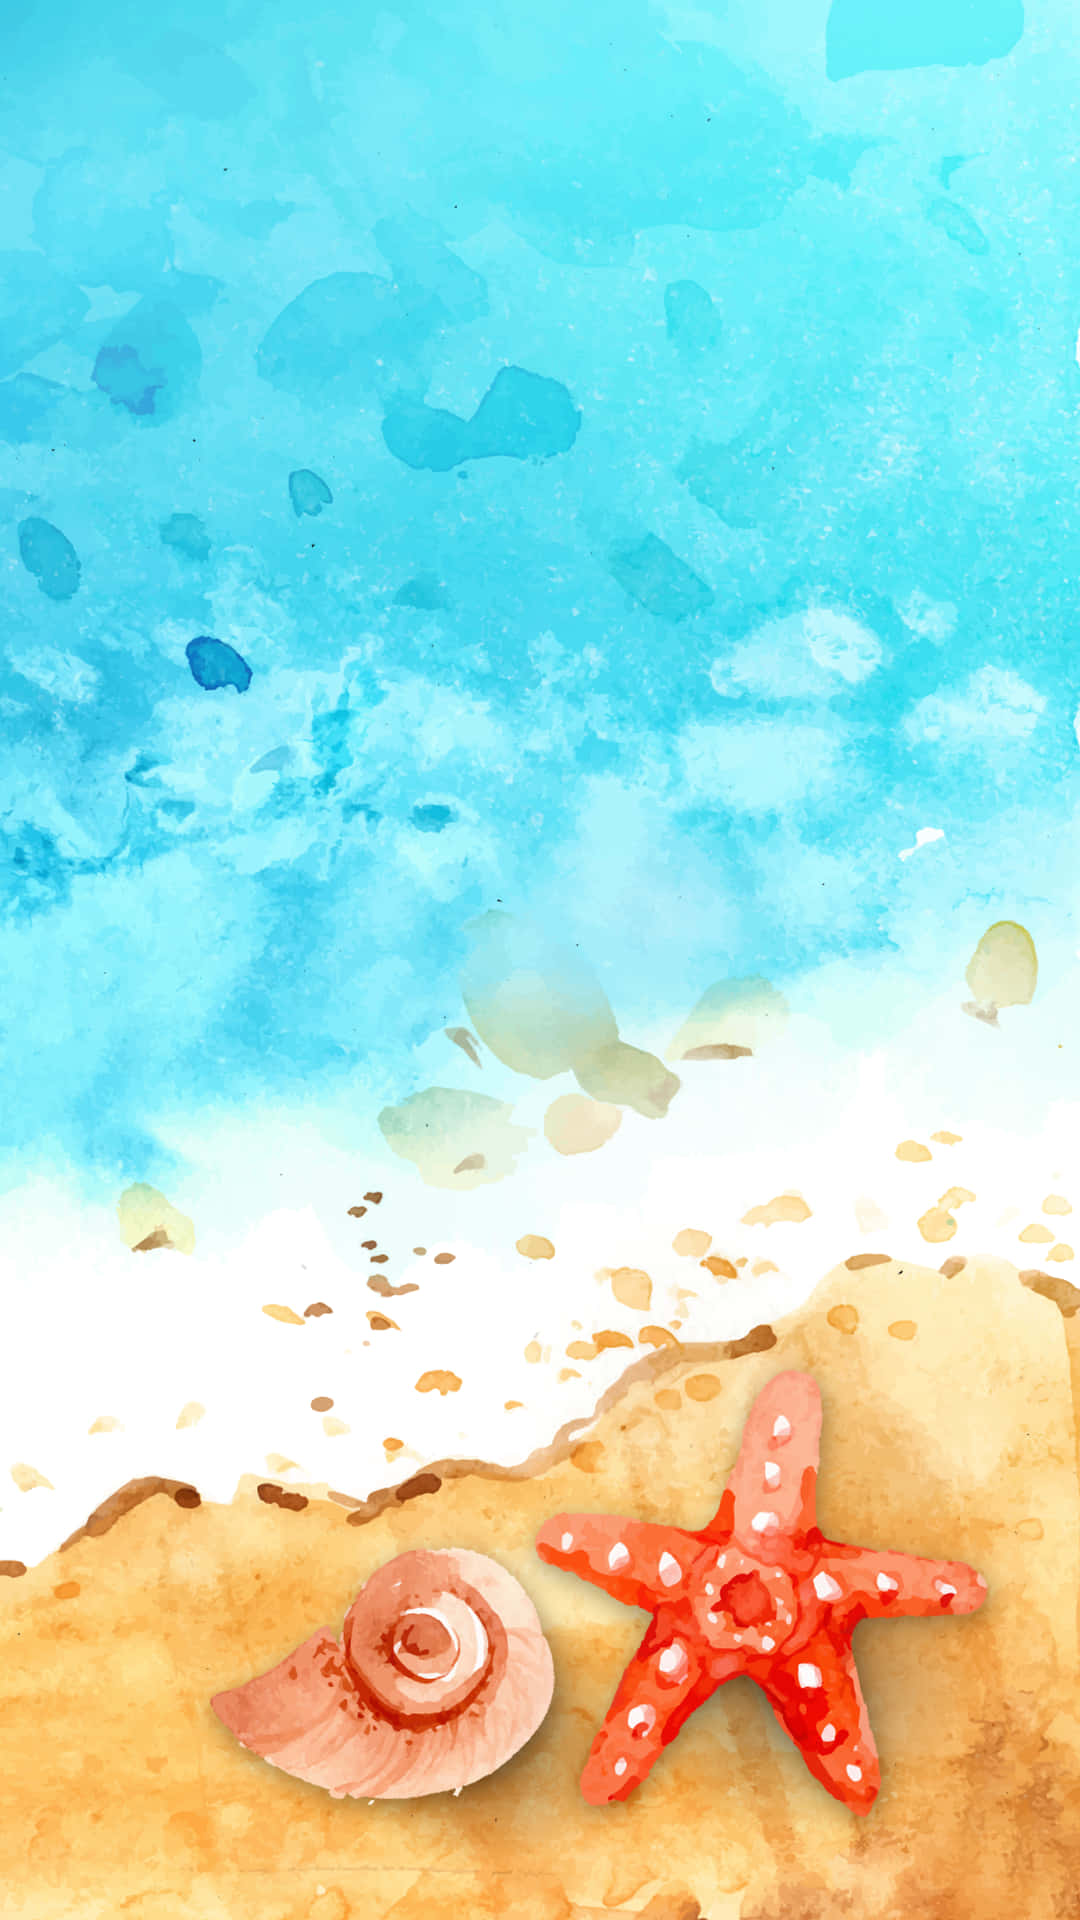 Brightly colored watercolor background